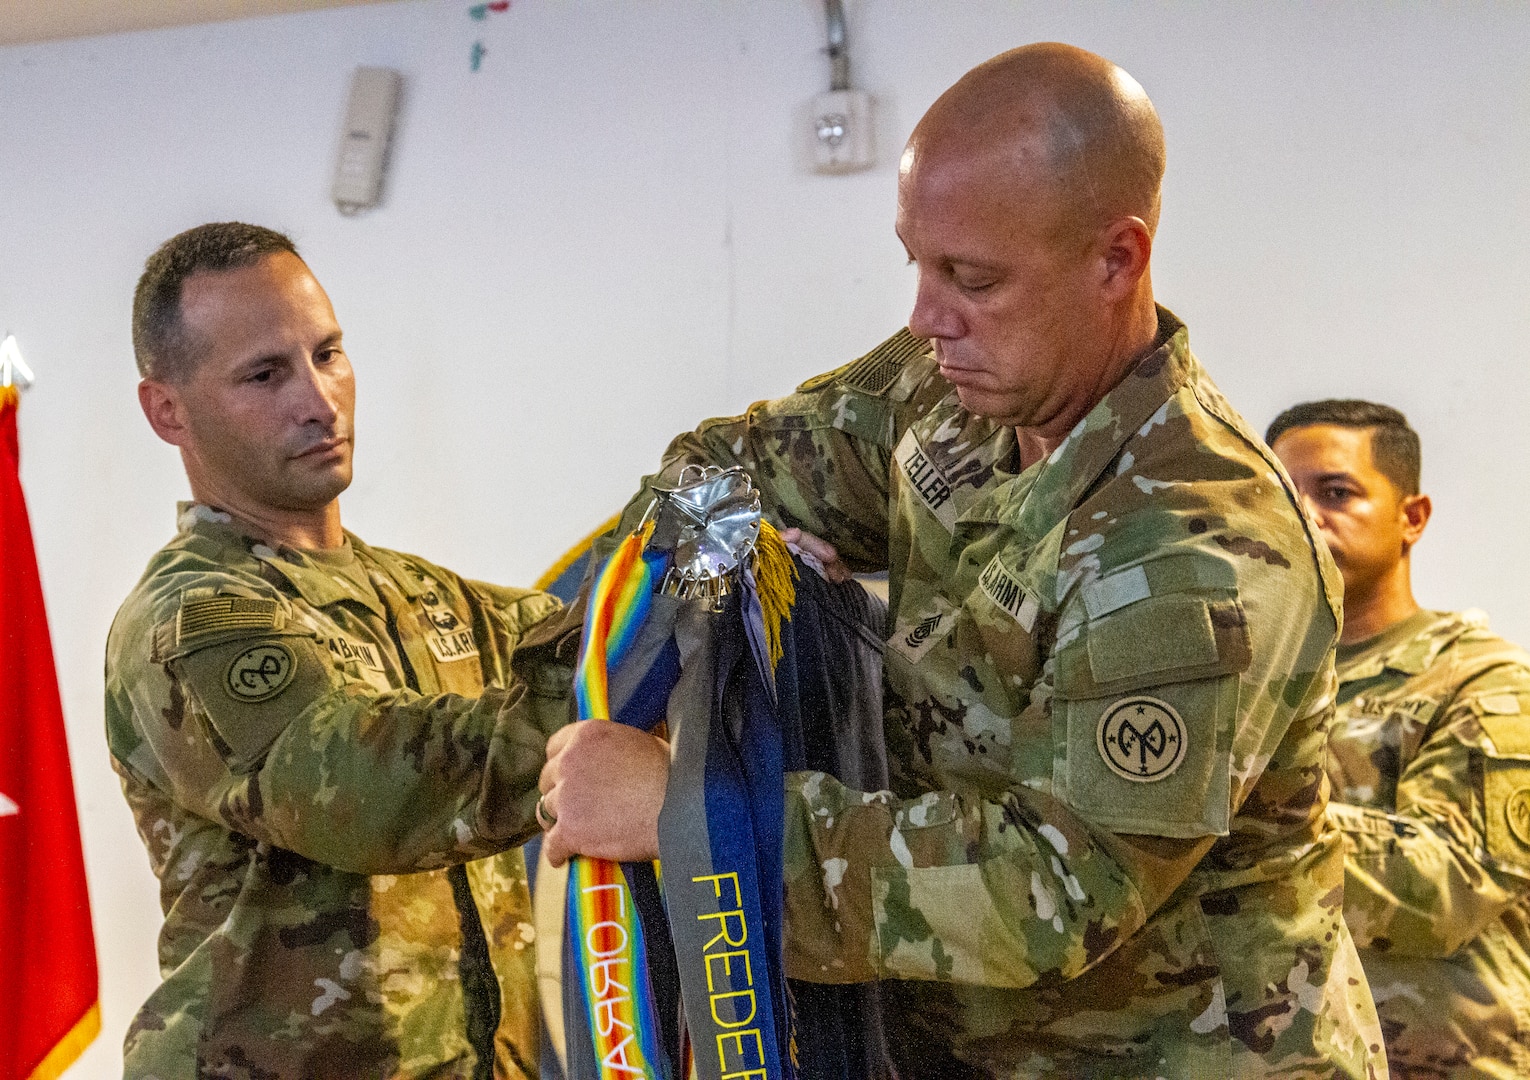 U.S. Army Lt. Col. Shawn Tabankin, the commander of 1st Battalion, 69th Infantry Regiment, and Command Sgt. Maj. Jason Zeller, the 1st Battalion, 69th Infantry Regiment, senior enlisted leader, unfurl the unit’s colors during a transfer-of-authority ceremony at Camp Lemonnier, Djibouti, Sep. 19, 2022. During the ceremony, more than 1,100 New York Army National Guard Soldiers officially began their service as part of Combined Joint Task Force – Horn of Africa.